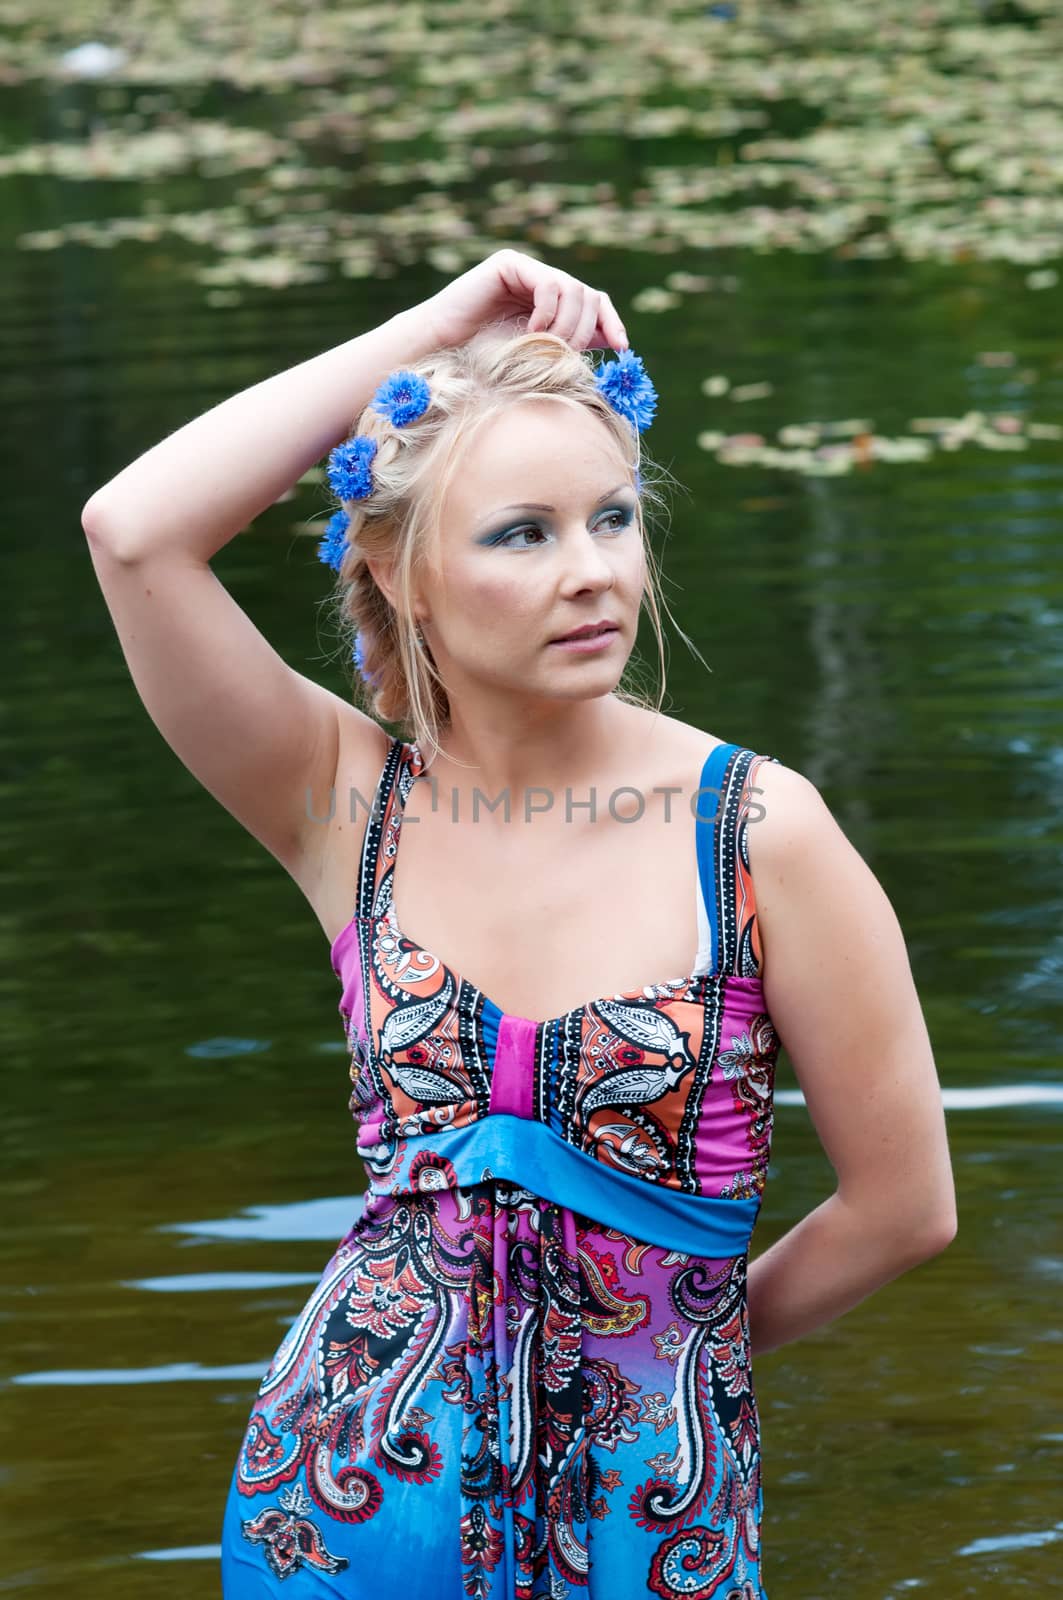 Beautiful woman in dress standing near the pond by anytka